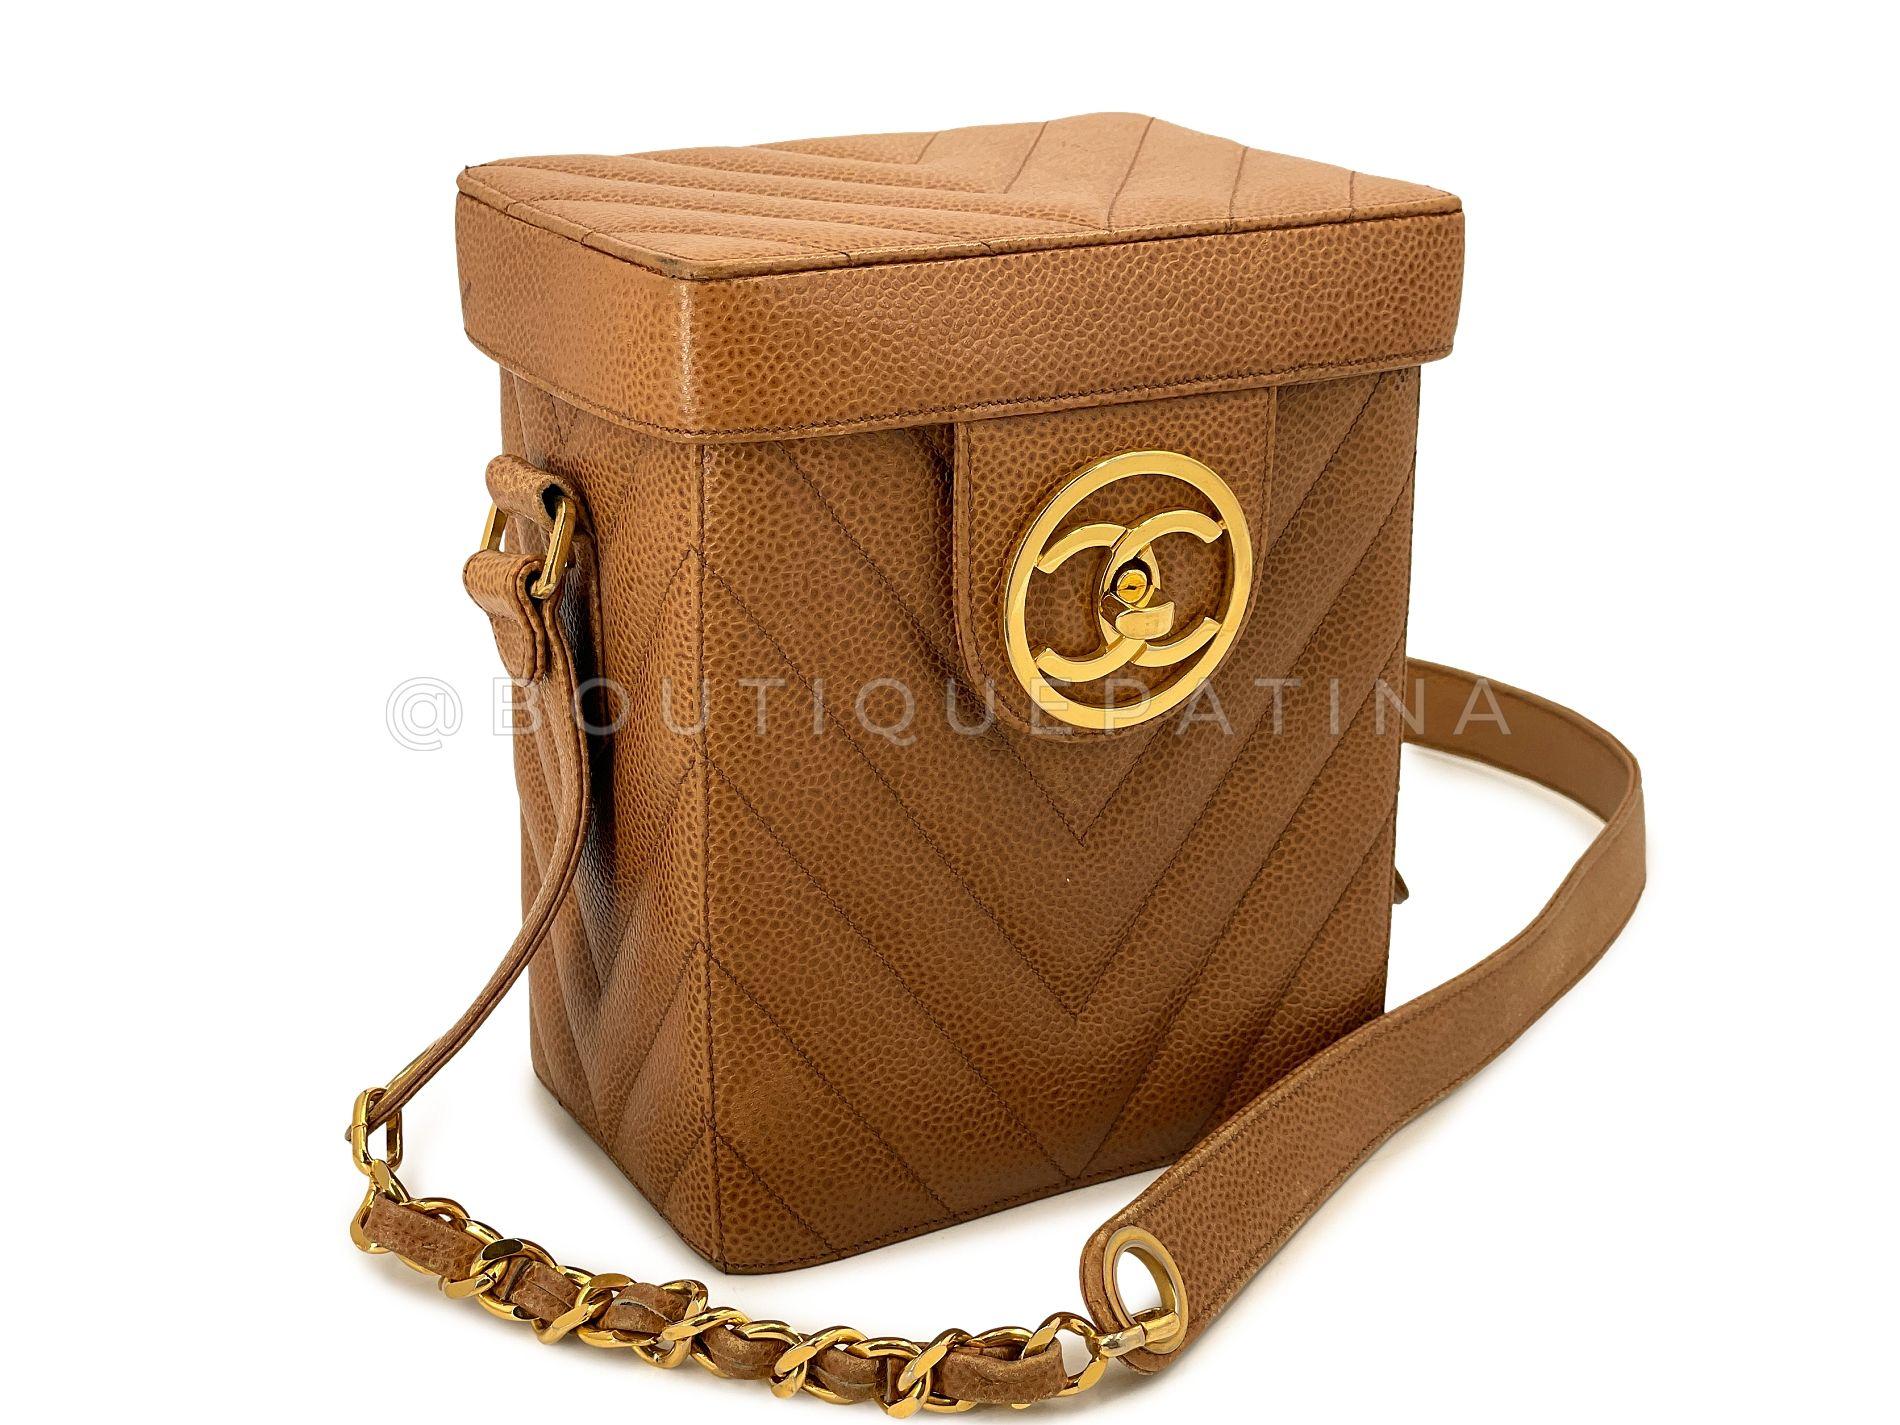 Store item: 67996
An unmistakable vintage Chanel collectible piece is this vintage vanity case box with crossbody strap.

A mini tall 